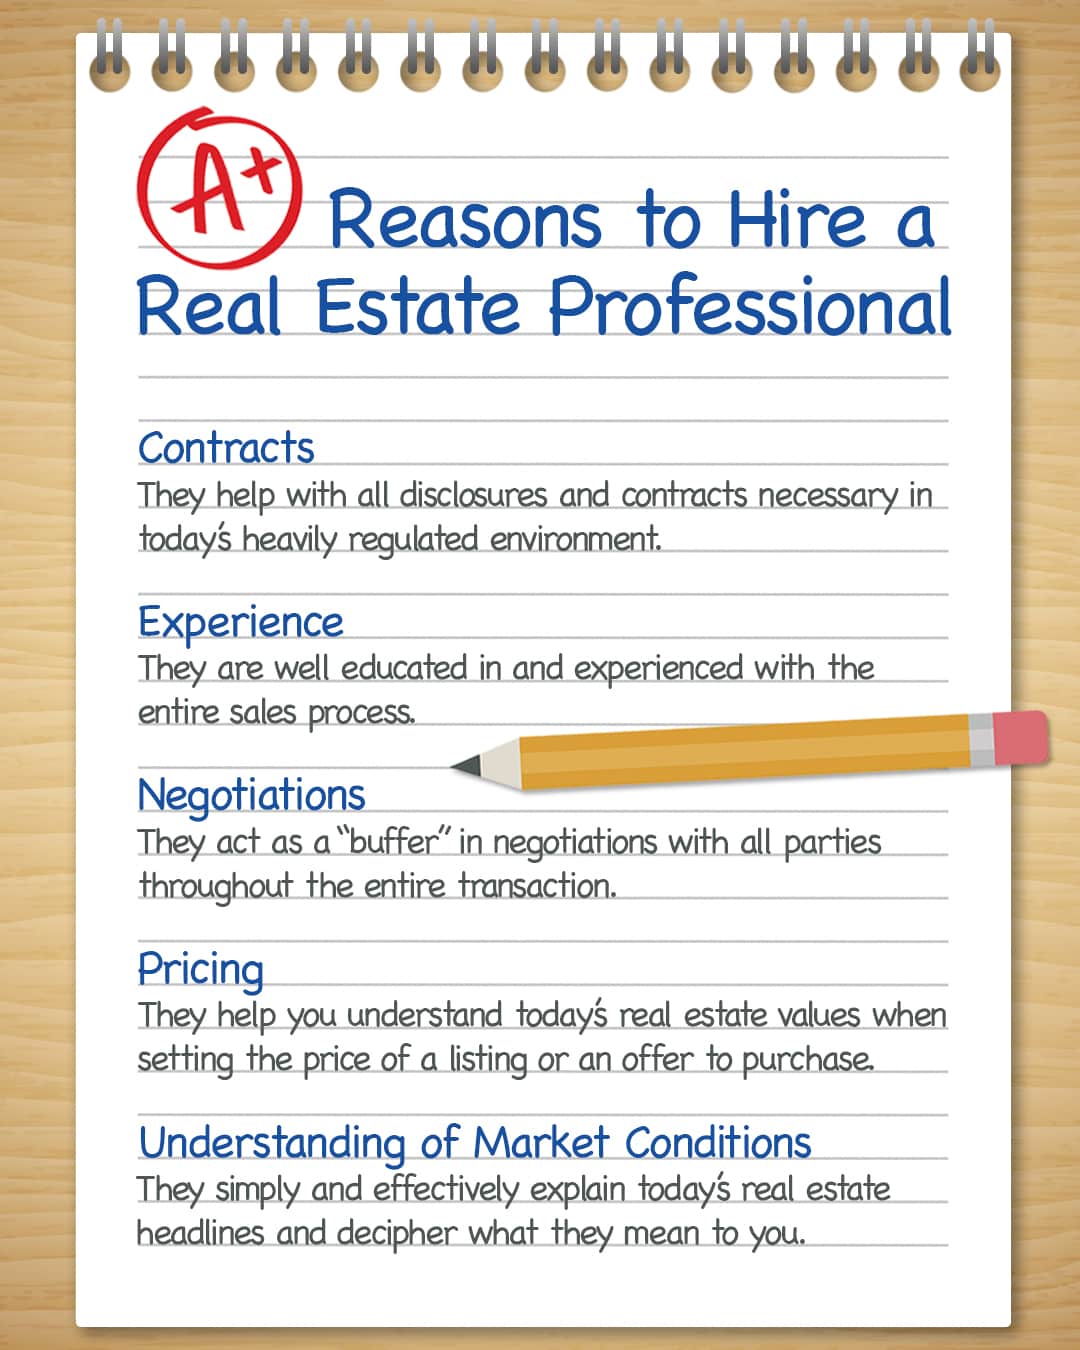 A+ Reasons to Hire a Real Estate Pro [INFOGRAPHIC] 